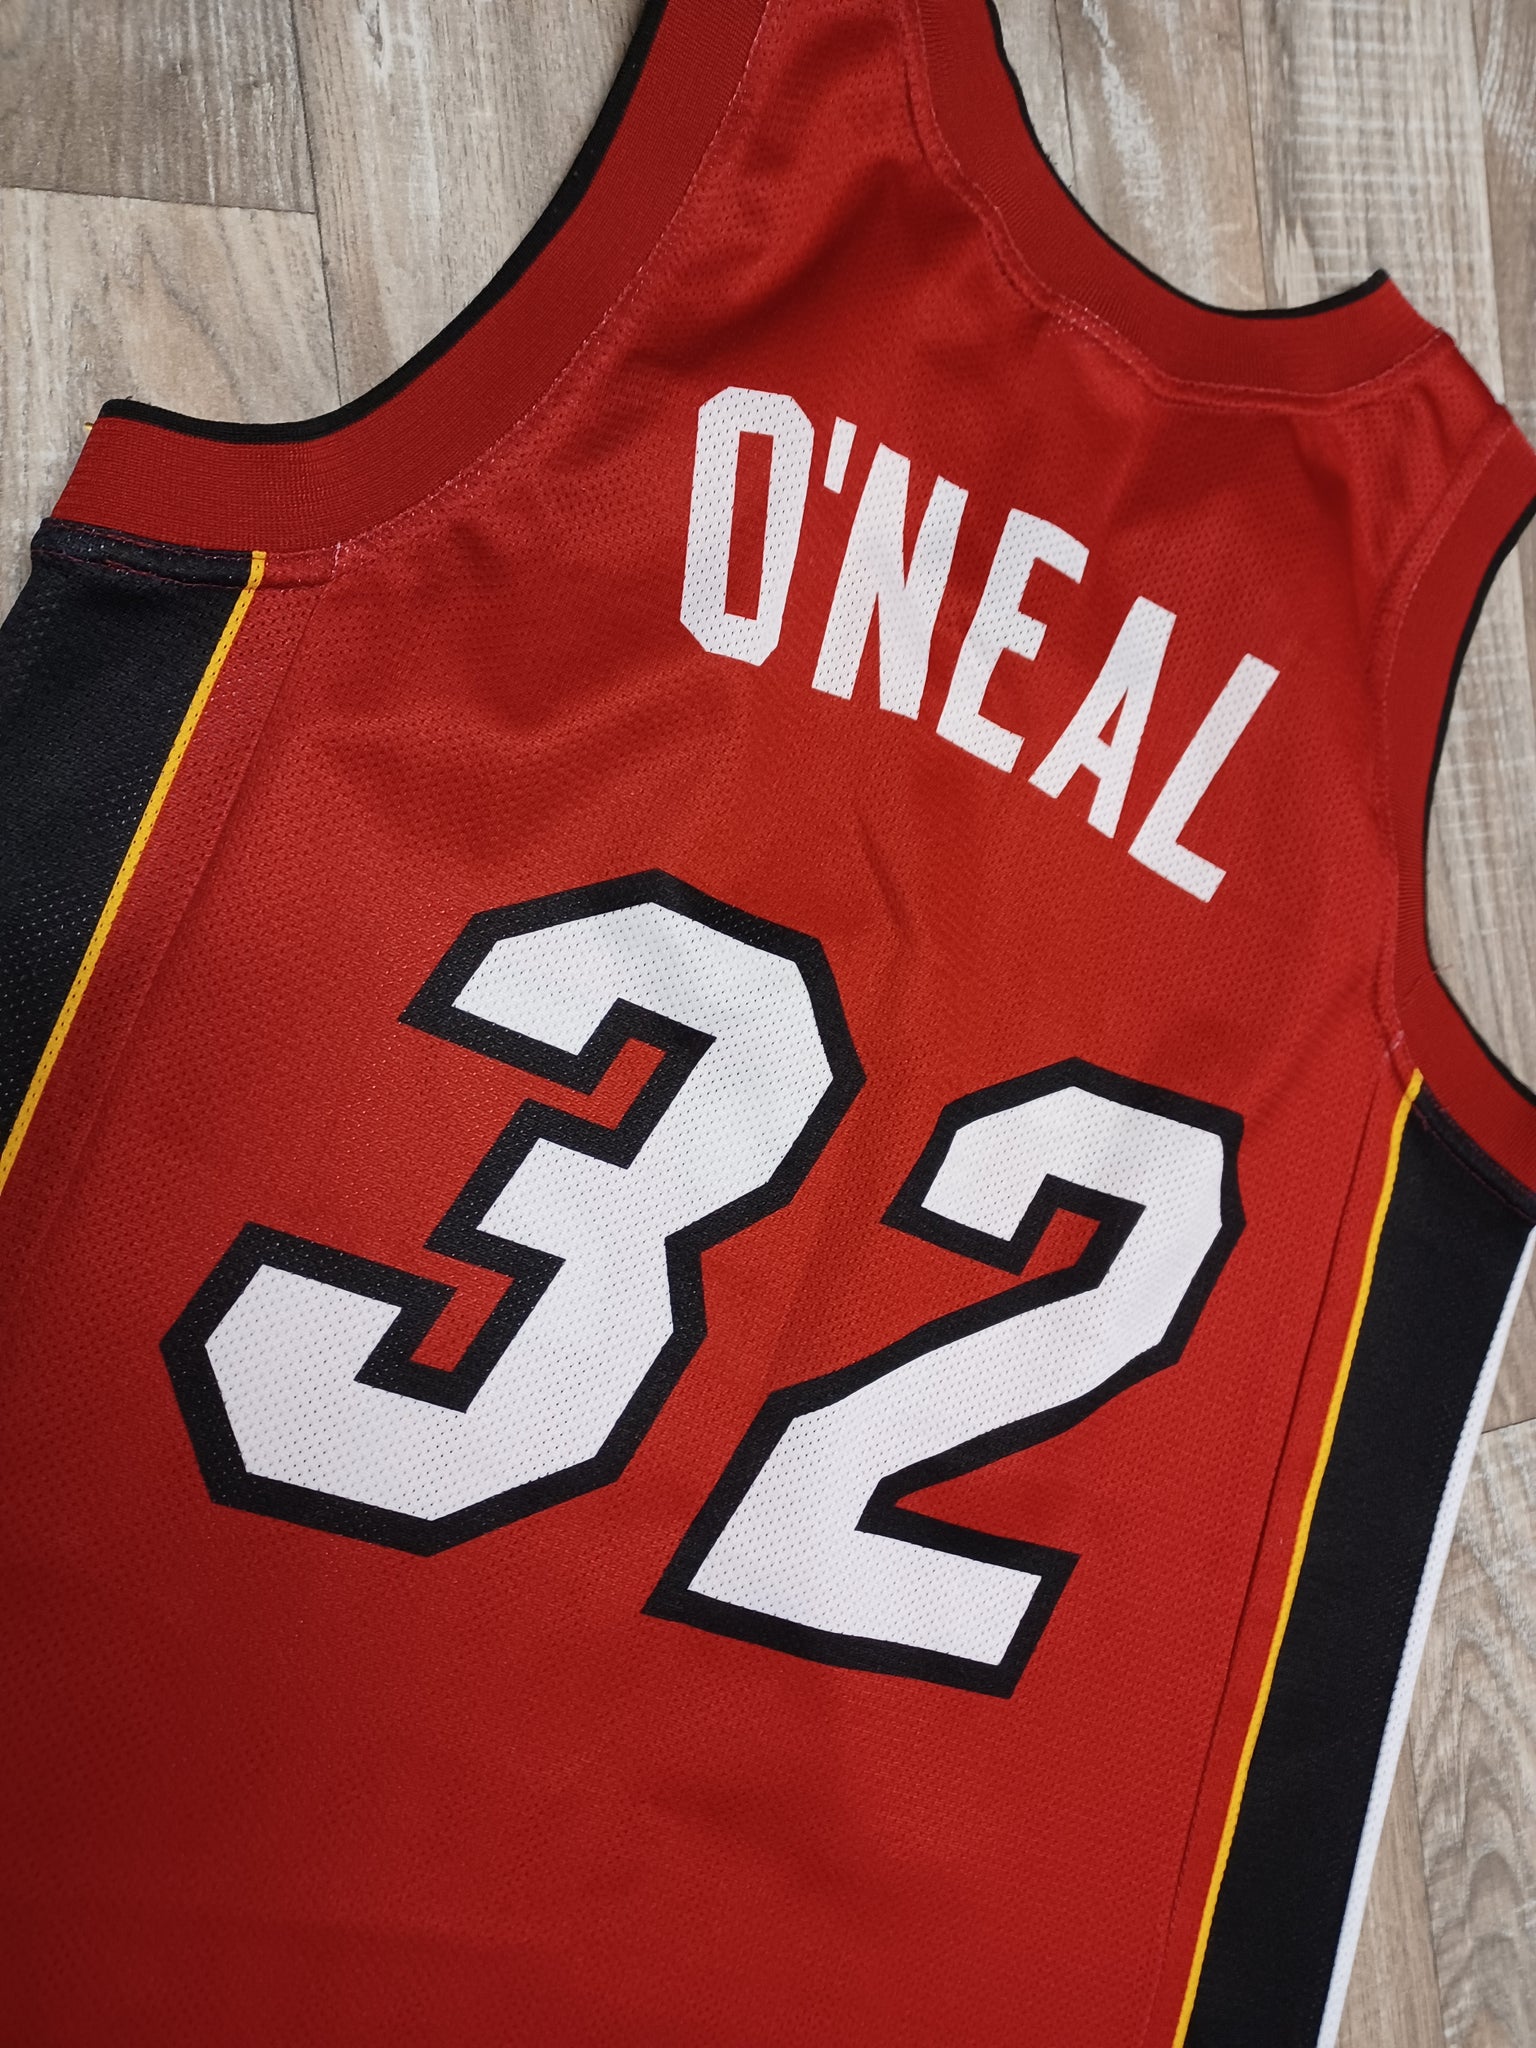 Miami Heat Shaquille ONeal Champion Jersey | Vintage NBA Basketball Sports  Red